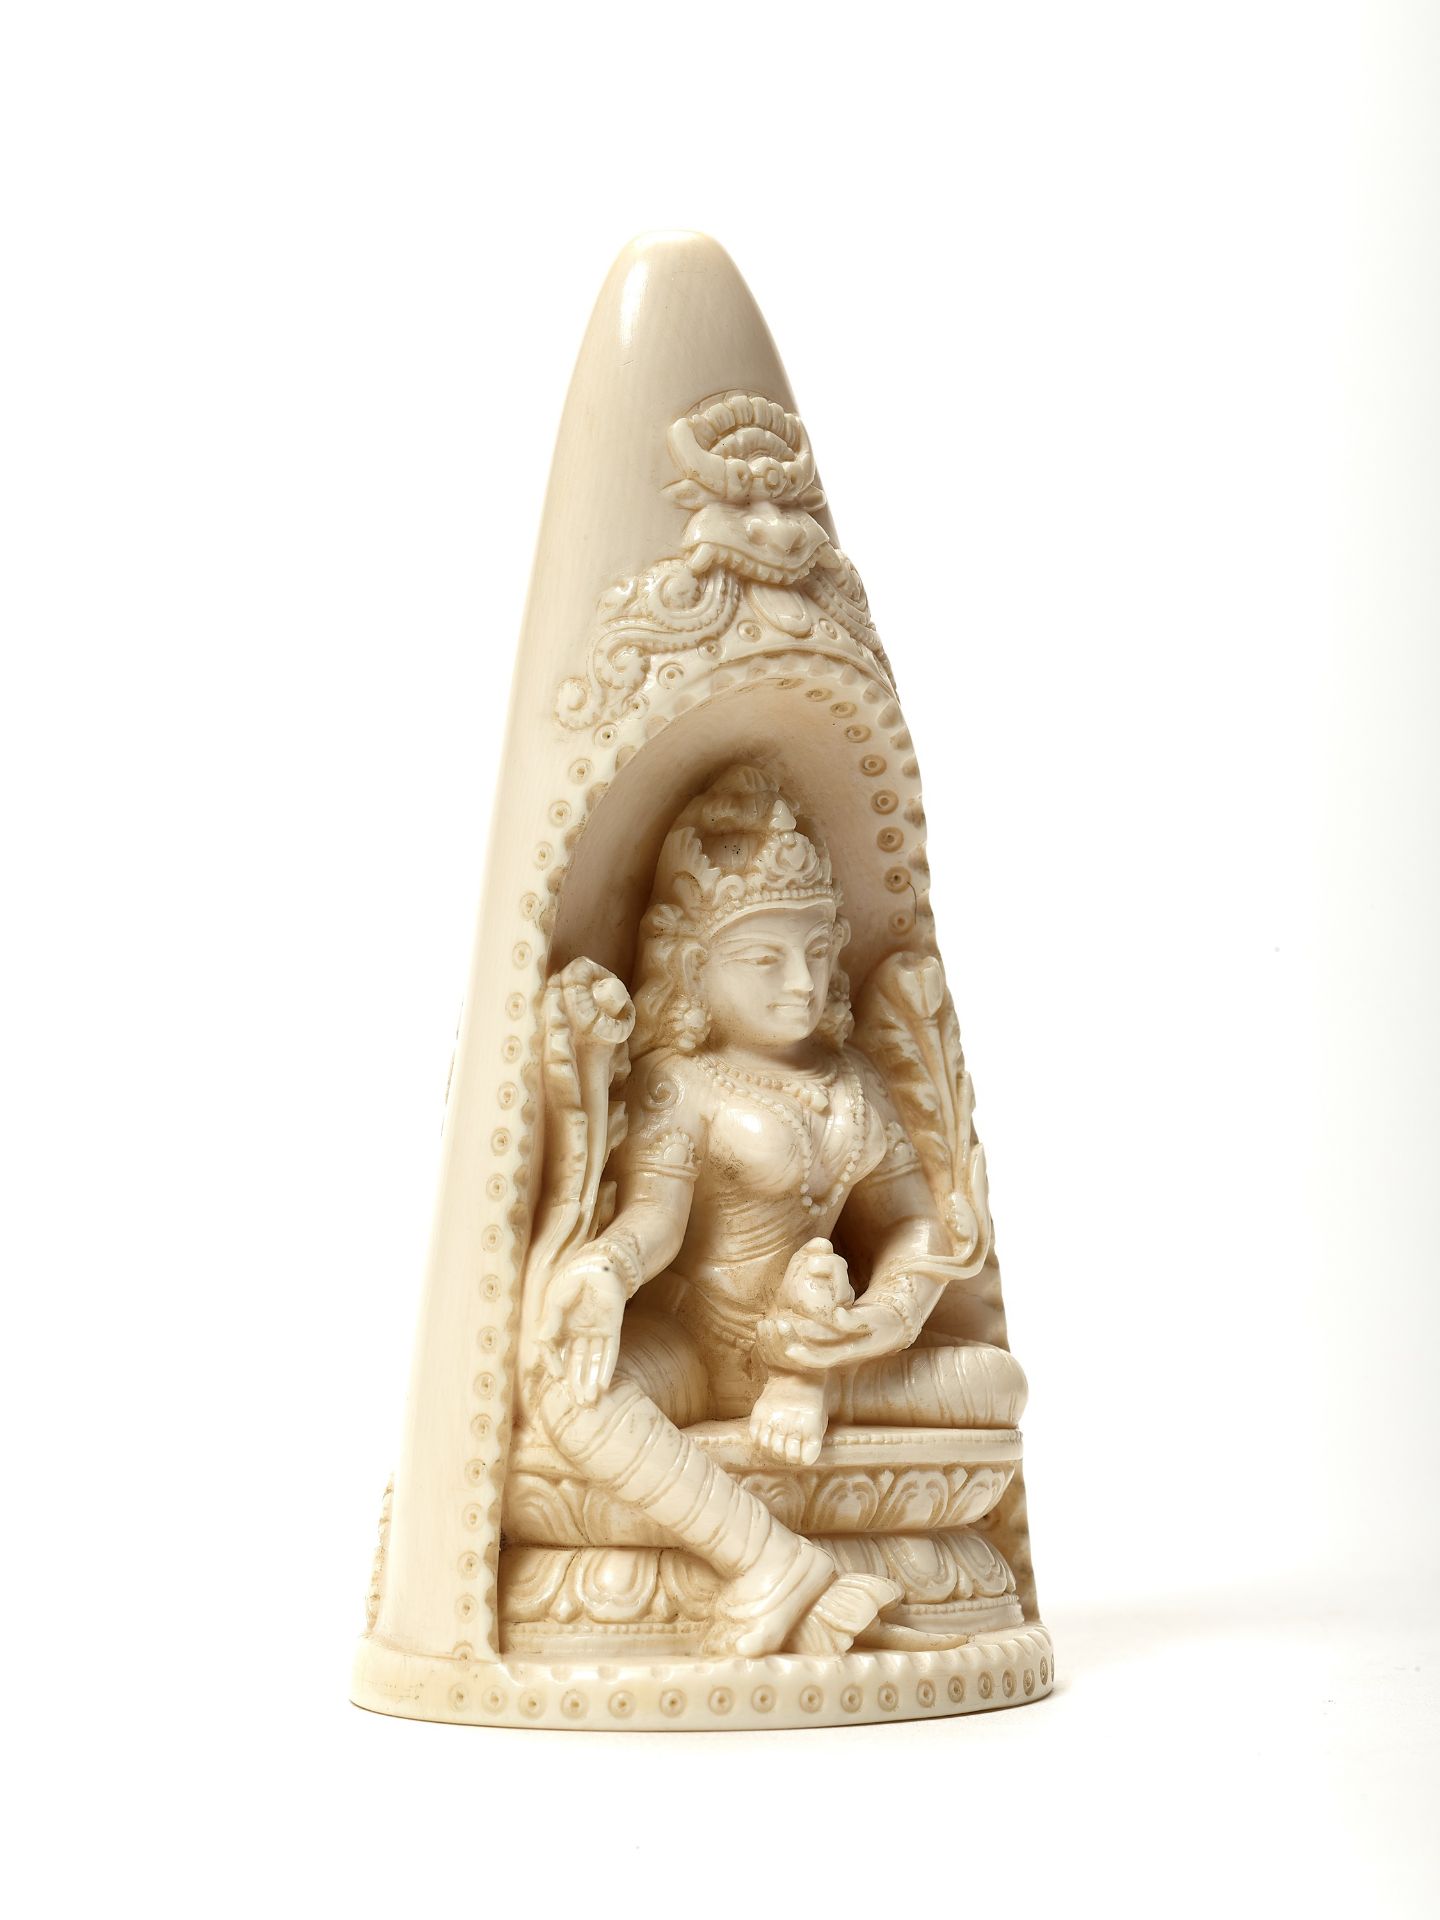 AN INDIAN IVORY TUSK CARVING OF PADMAPANI, 20TH CENTURY - Image 2 of 5